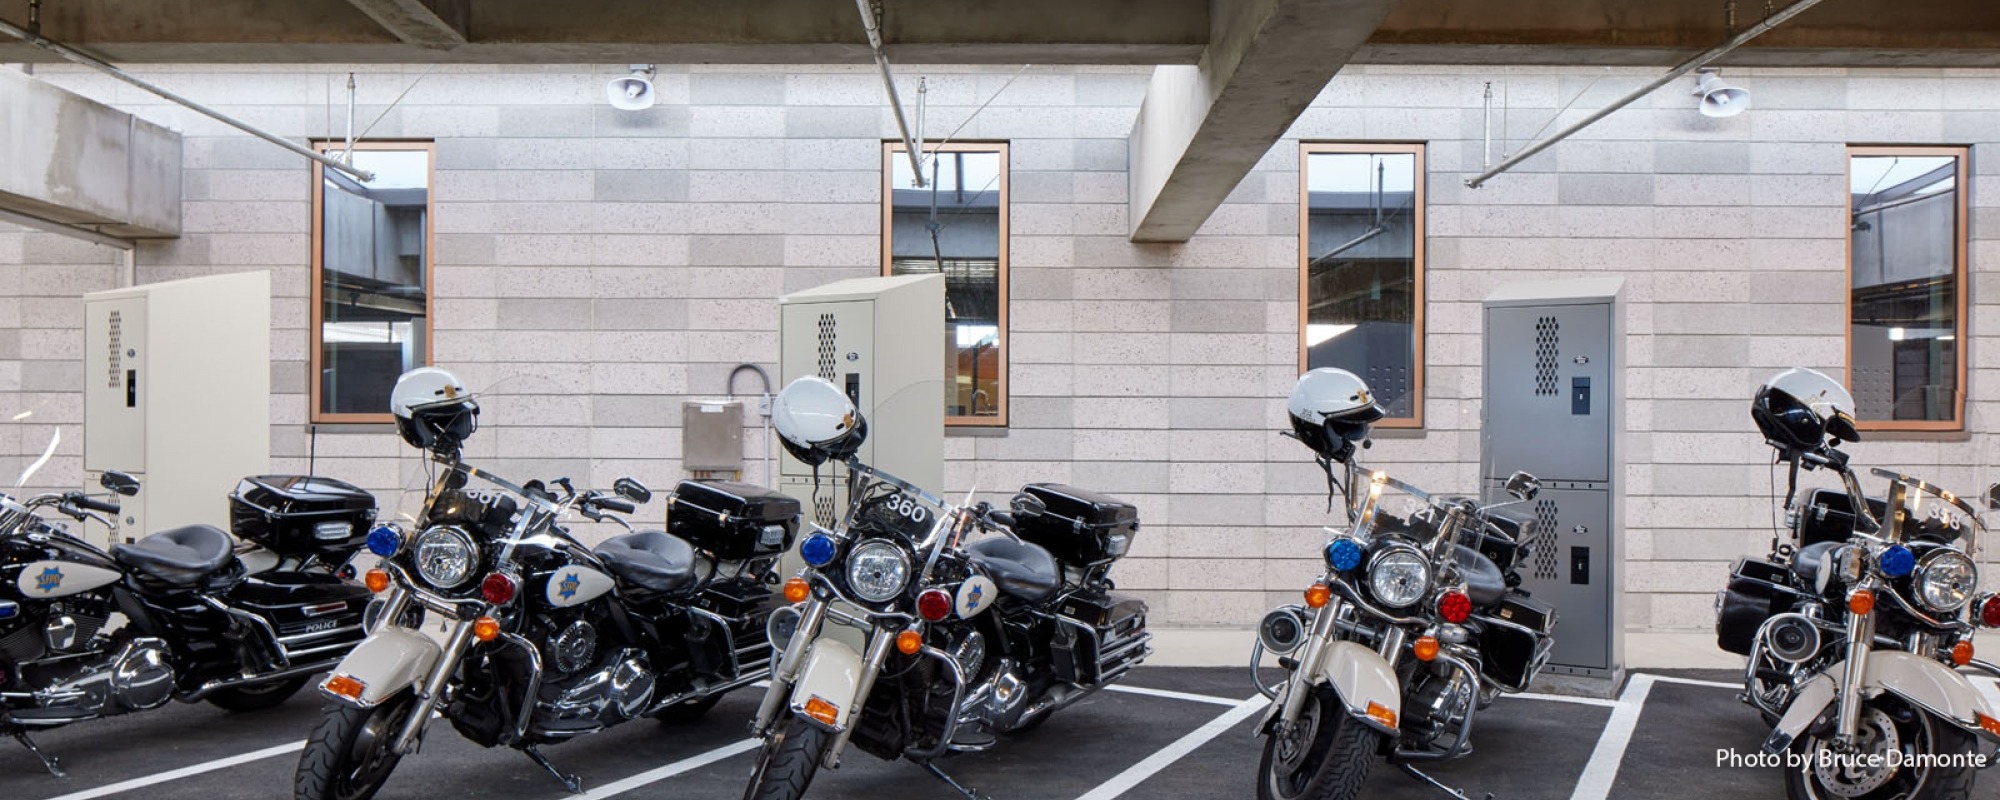 Police motorcycles are parked at the Traffic Company and Forensic Services Division facility.